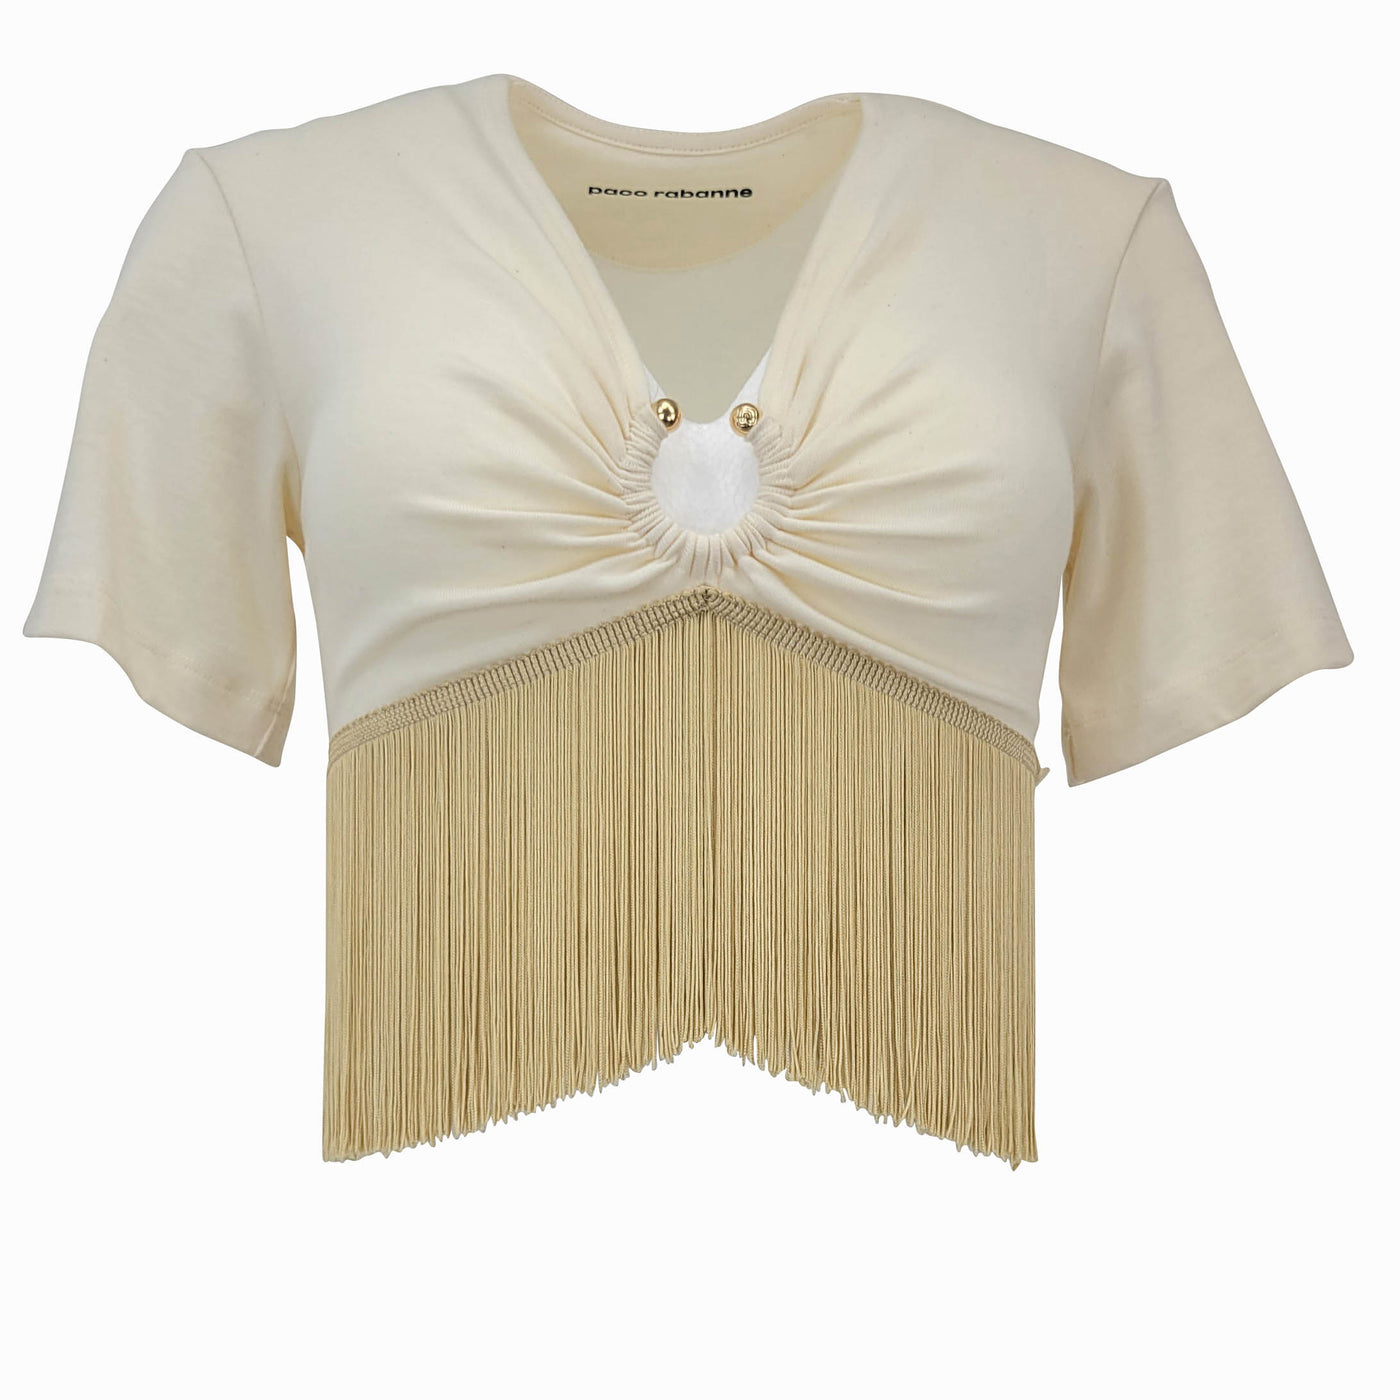 Paco Rabanne Crop Top With Piercing Ring and Fringe in Nude - Discounts on Paco Rabanne at UAL